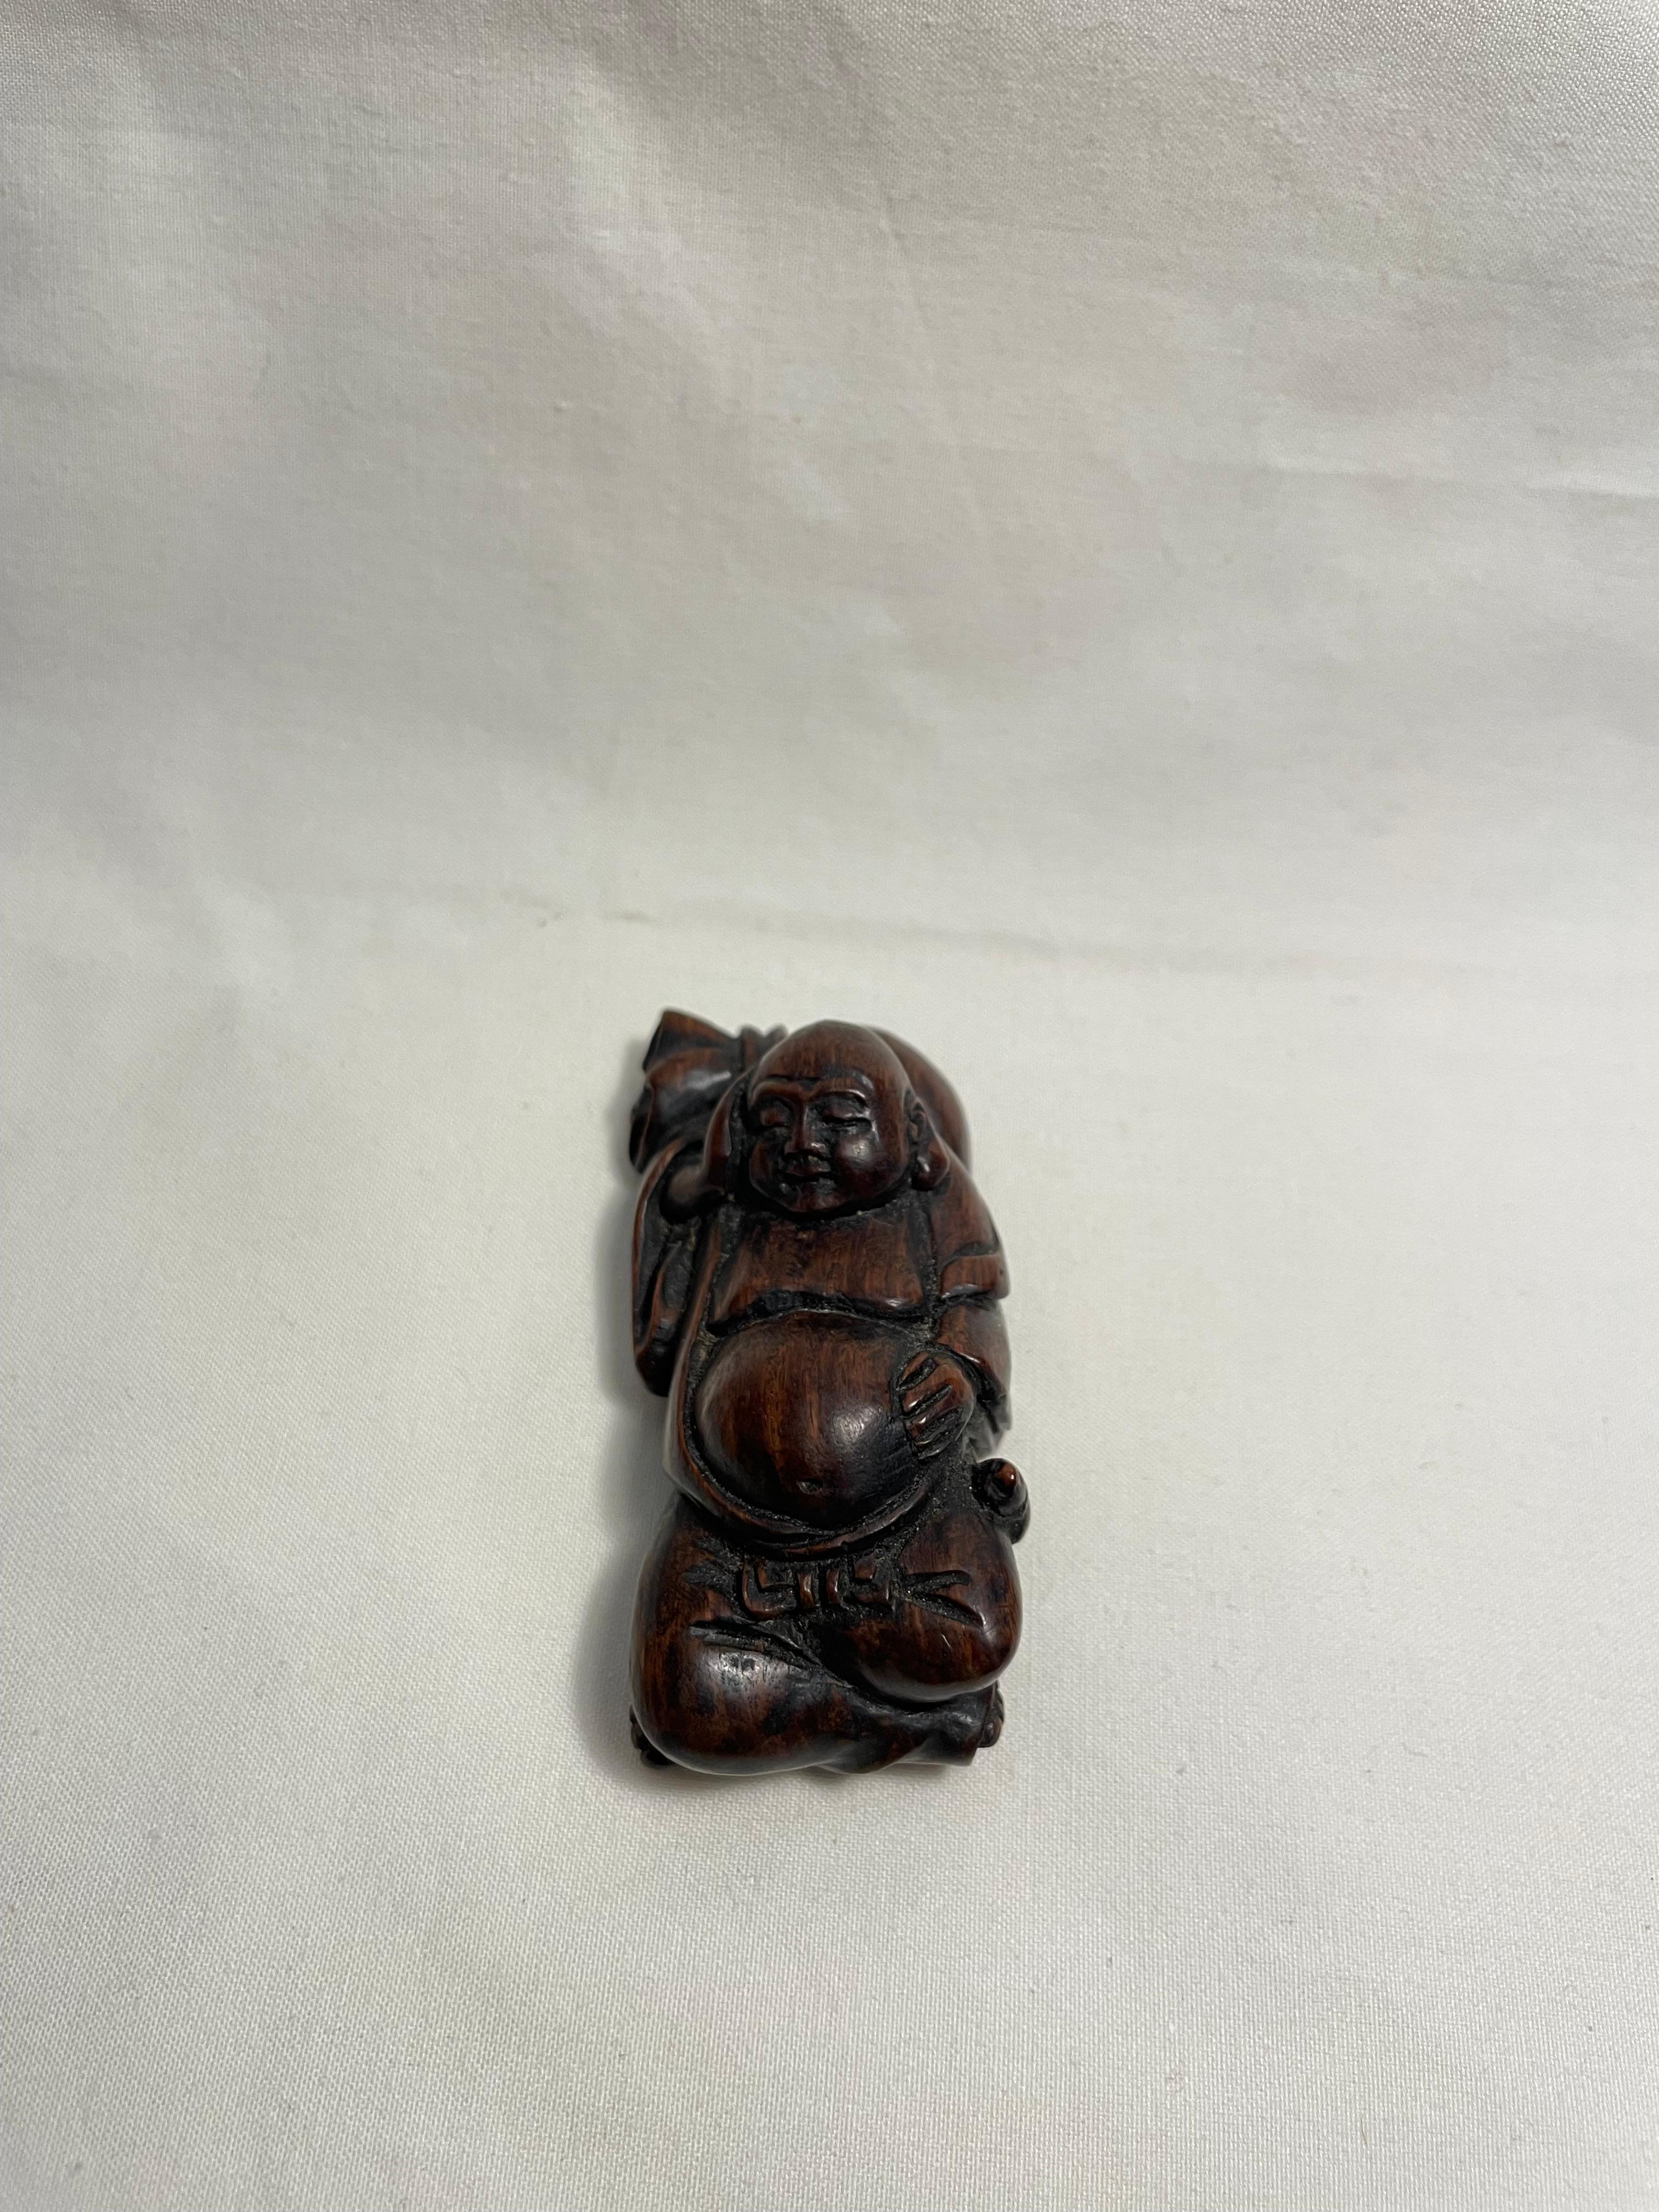 This is an antique netsuke made in Japan around Taisho period 1920s.
This netsuke was made by a netsuke artist 'Gyokuzan' (you can find his signature on the bottom of this netsuke.)
Netsuke is a miniature sculpture, originating in 17th century